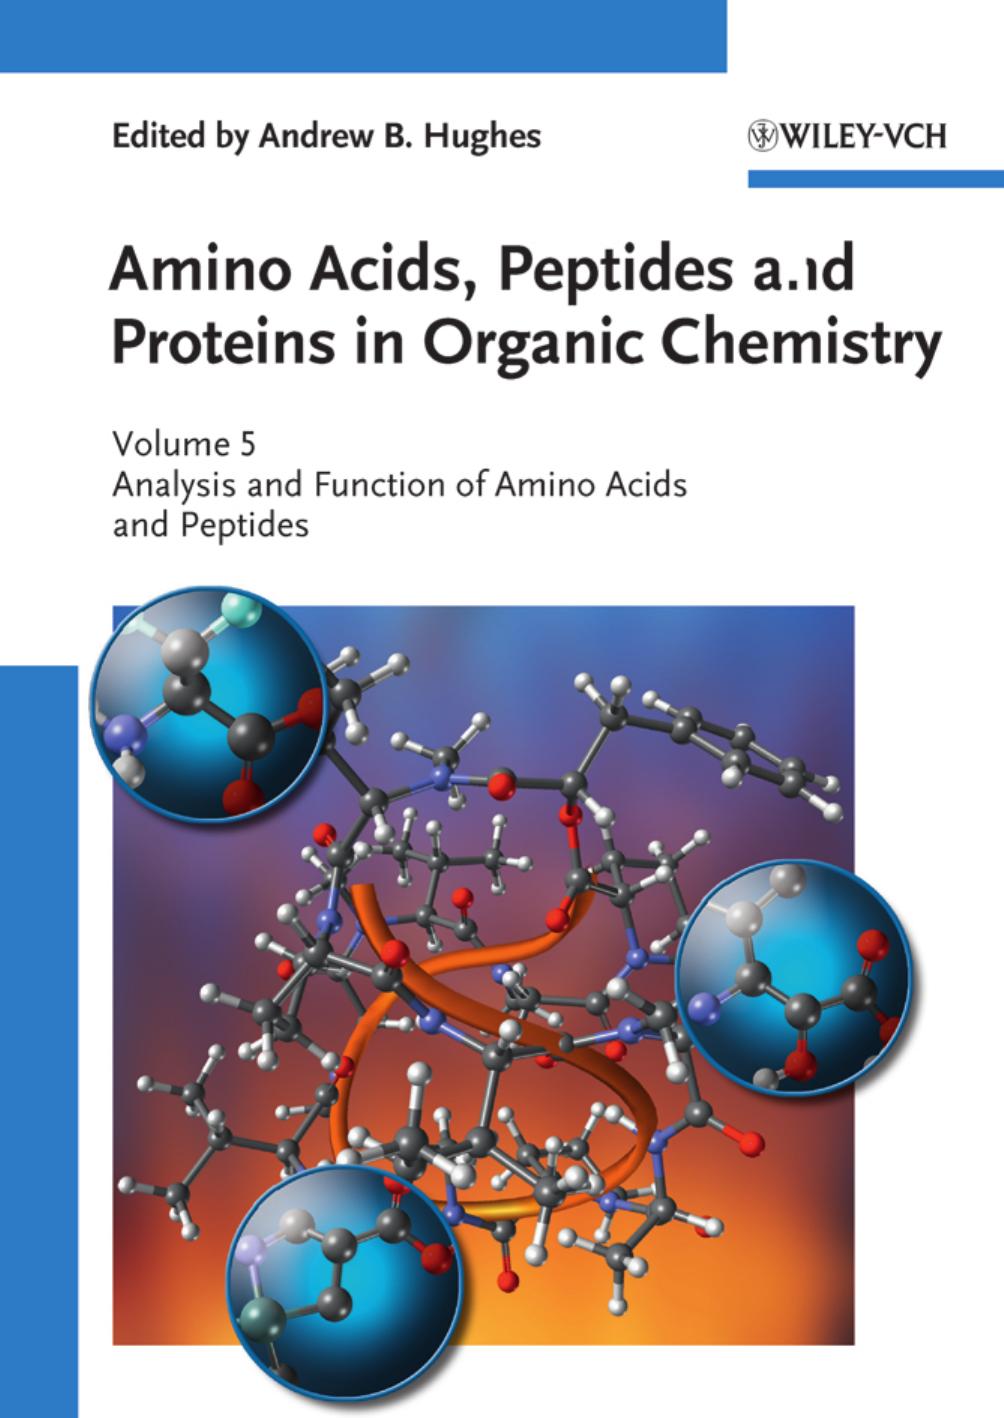 Amino Acids, Peptides and Proteins in Organic Chemistry: Volume 5 - Analysis and Function of Amino Acids and Peptides